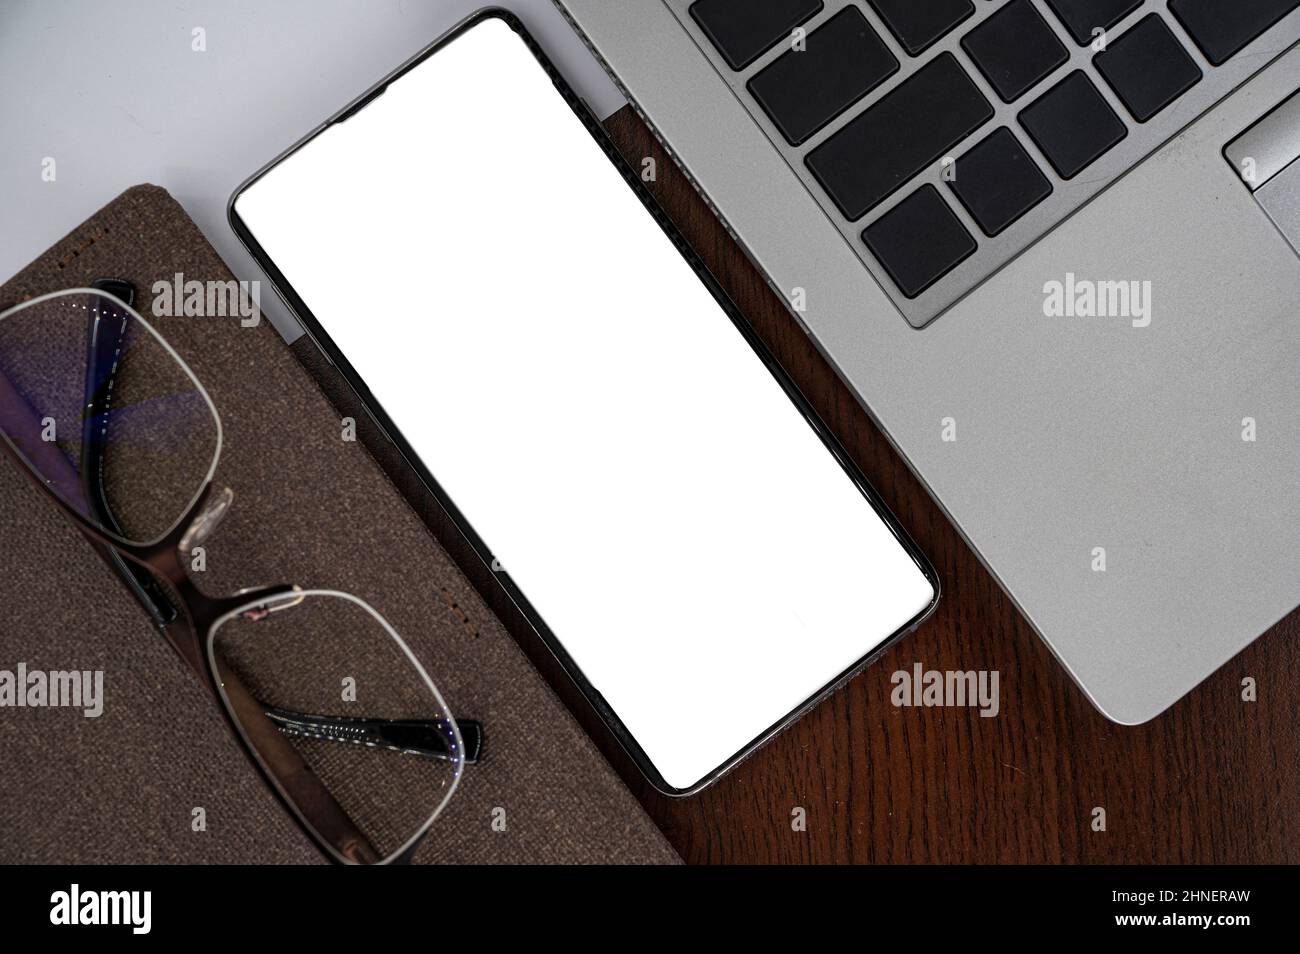 Top view of phone on table near laptop, notepad and glasses with white screen. Stock Photo